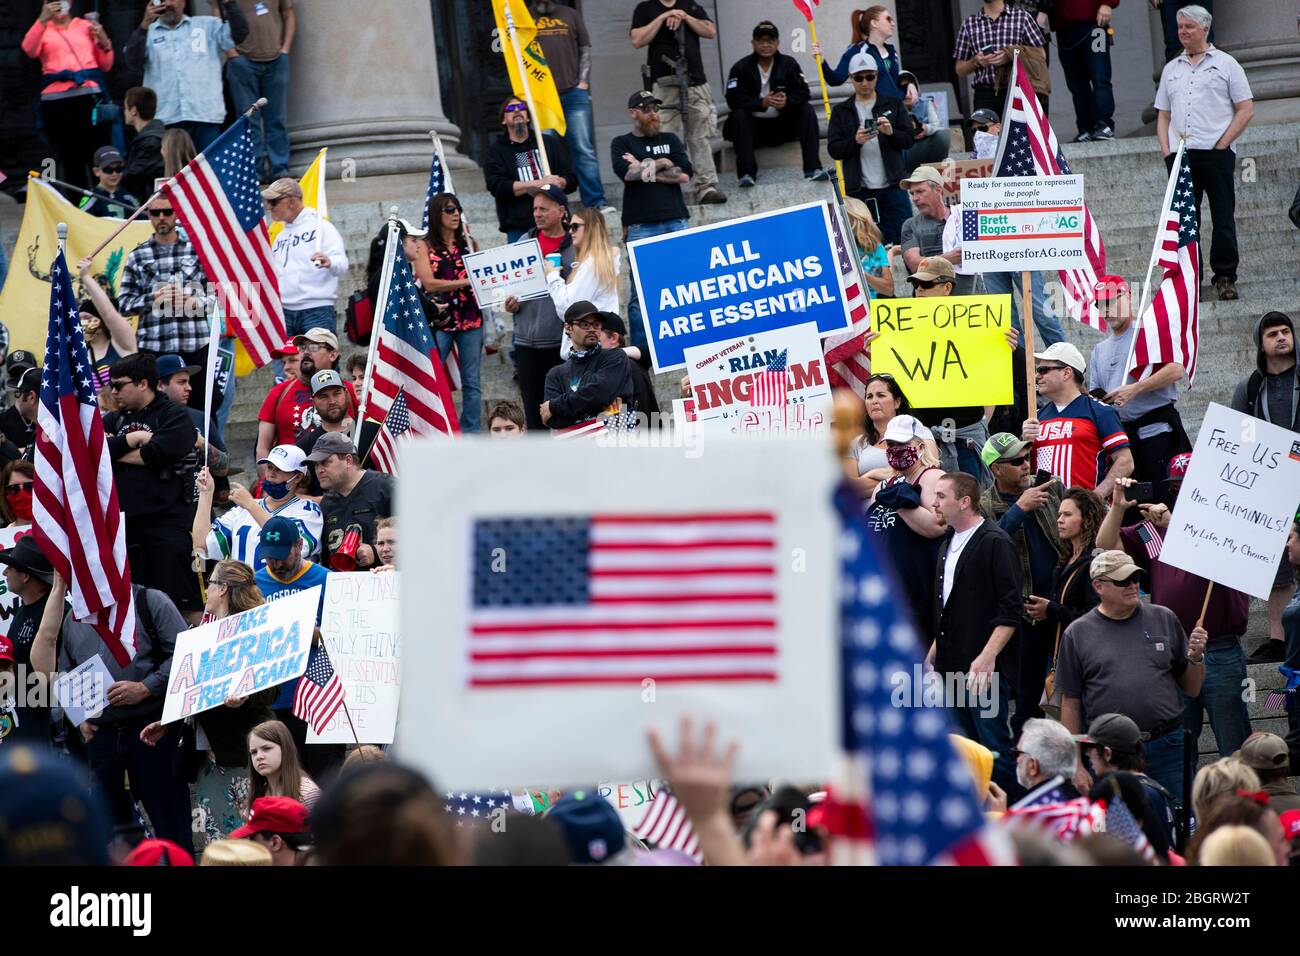 People holds signs supporting President Donald Trump and calling for Washington State to be re-opened at a protest against stay-at-home restrictions d Stock Photo